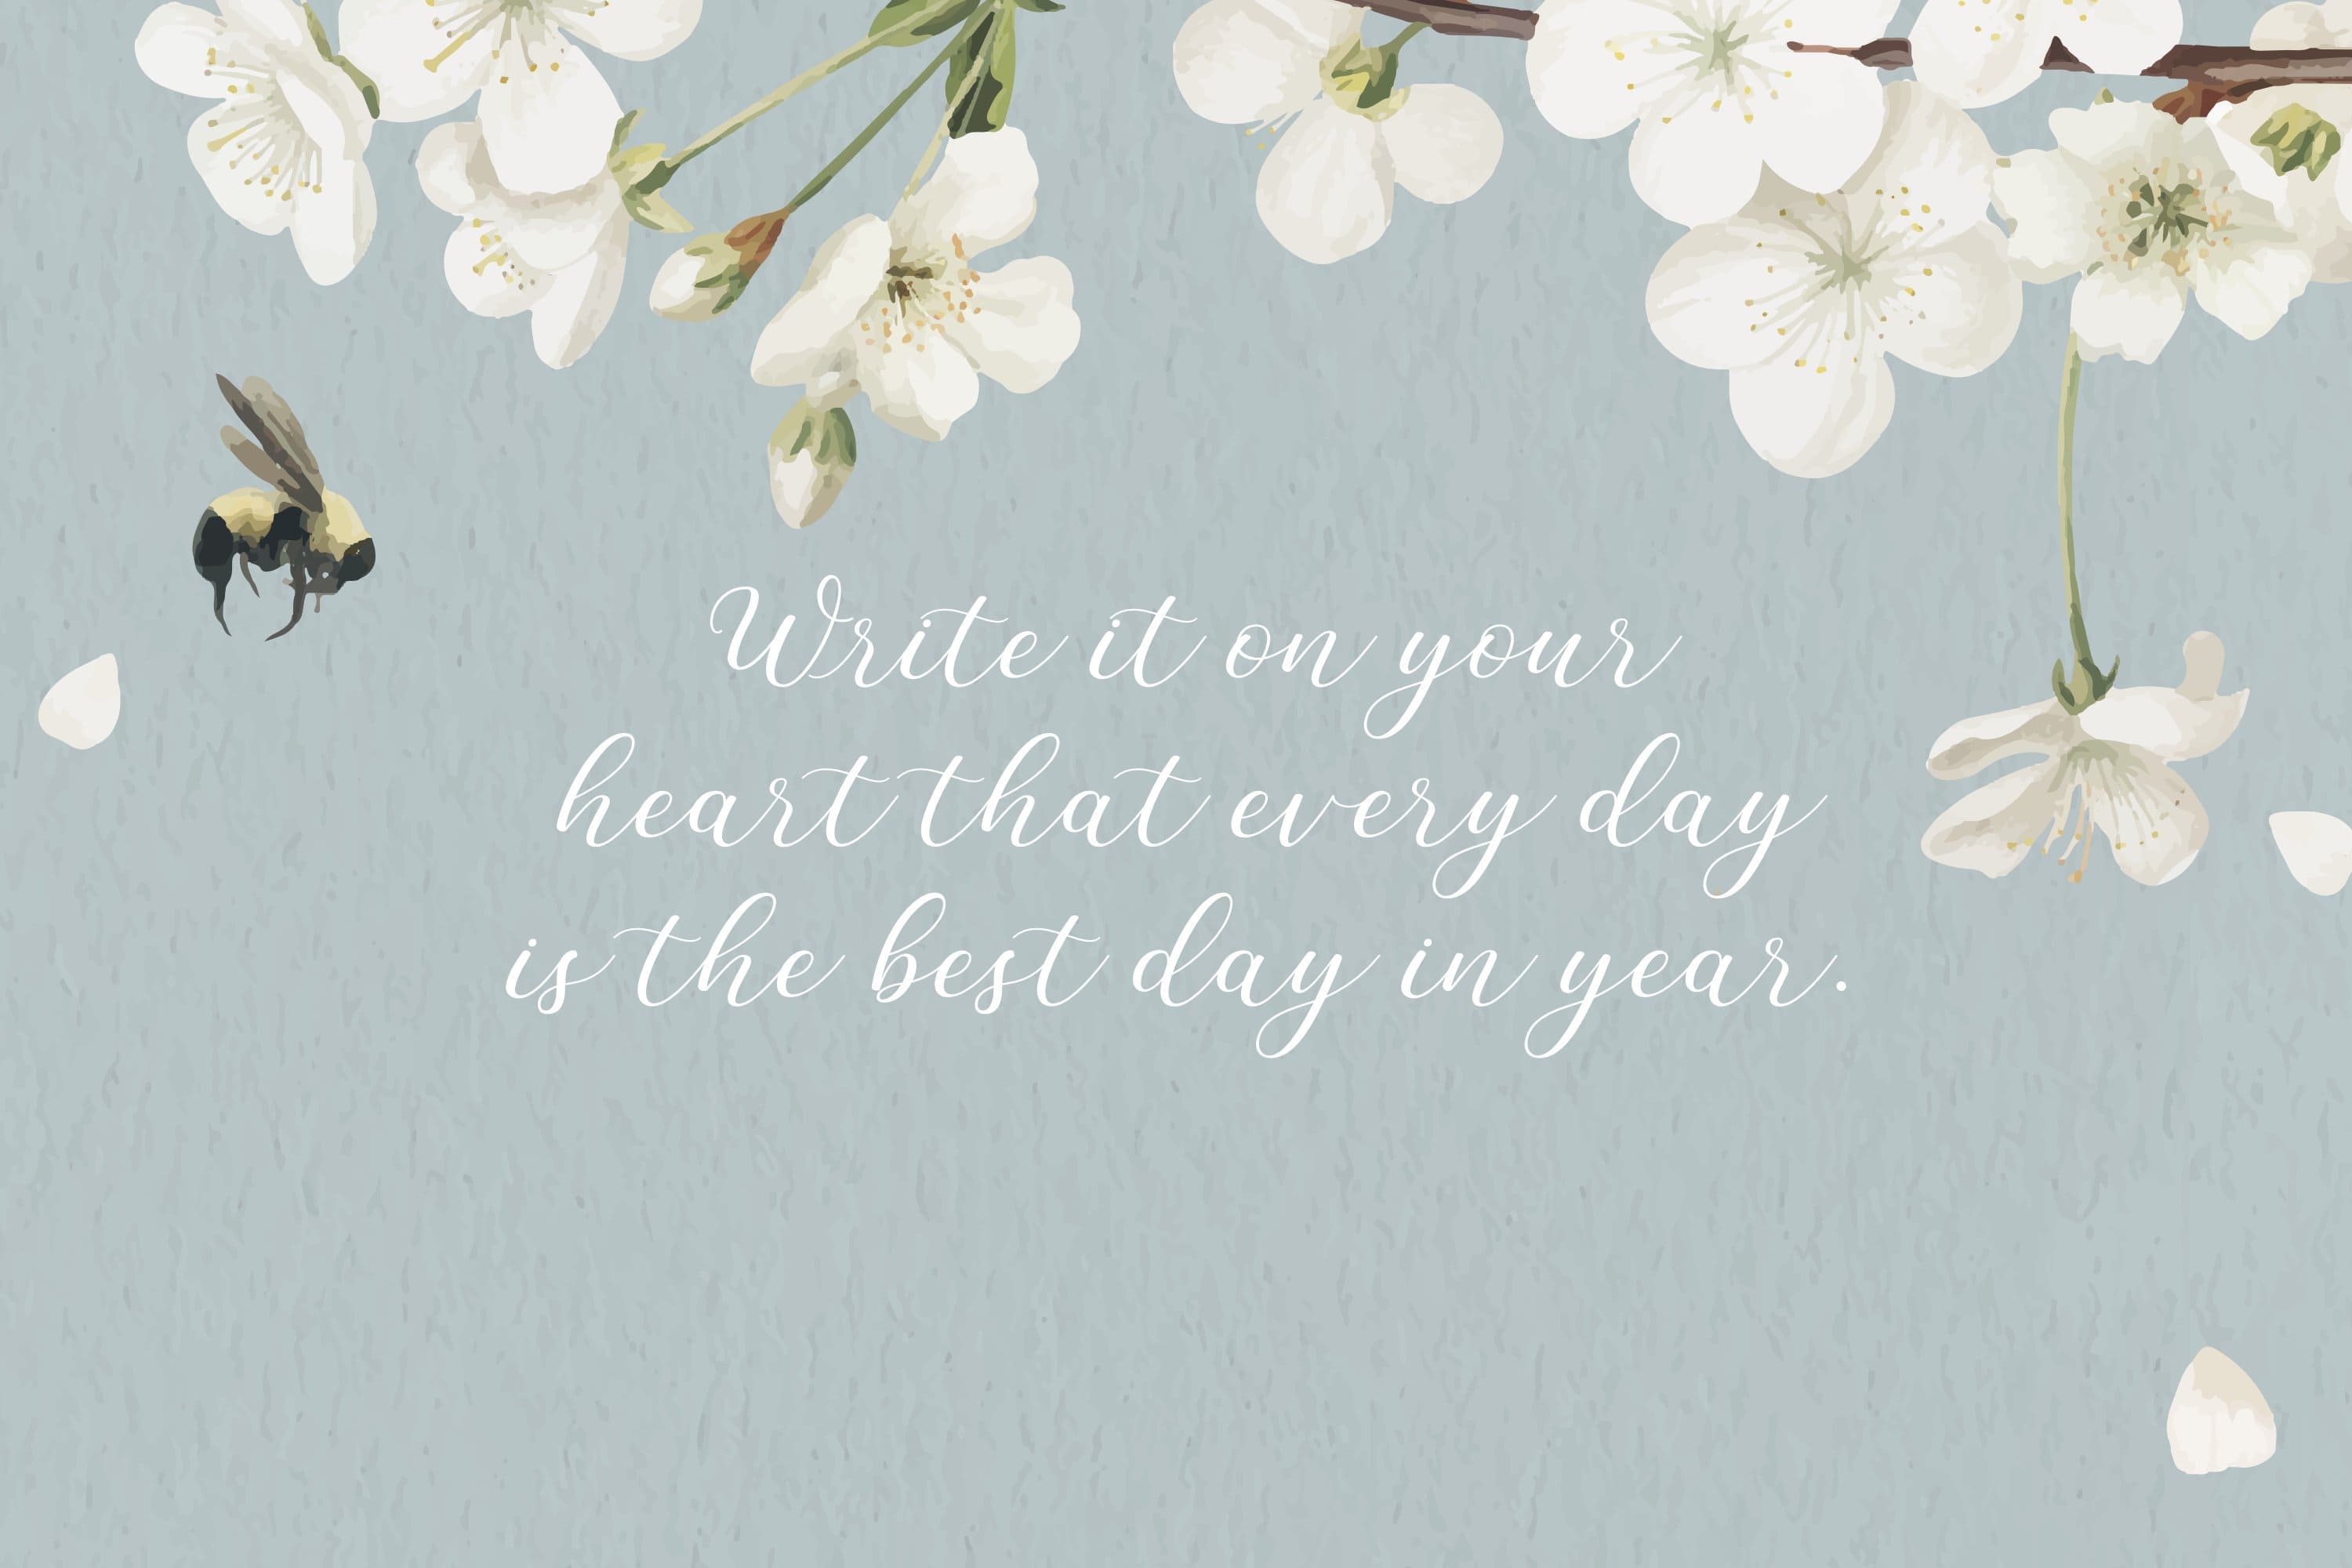 Description on the picture: "Write it on your heart that every day is the best day in the year".